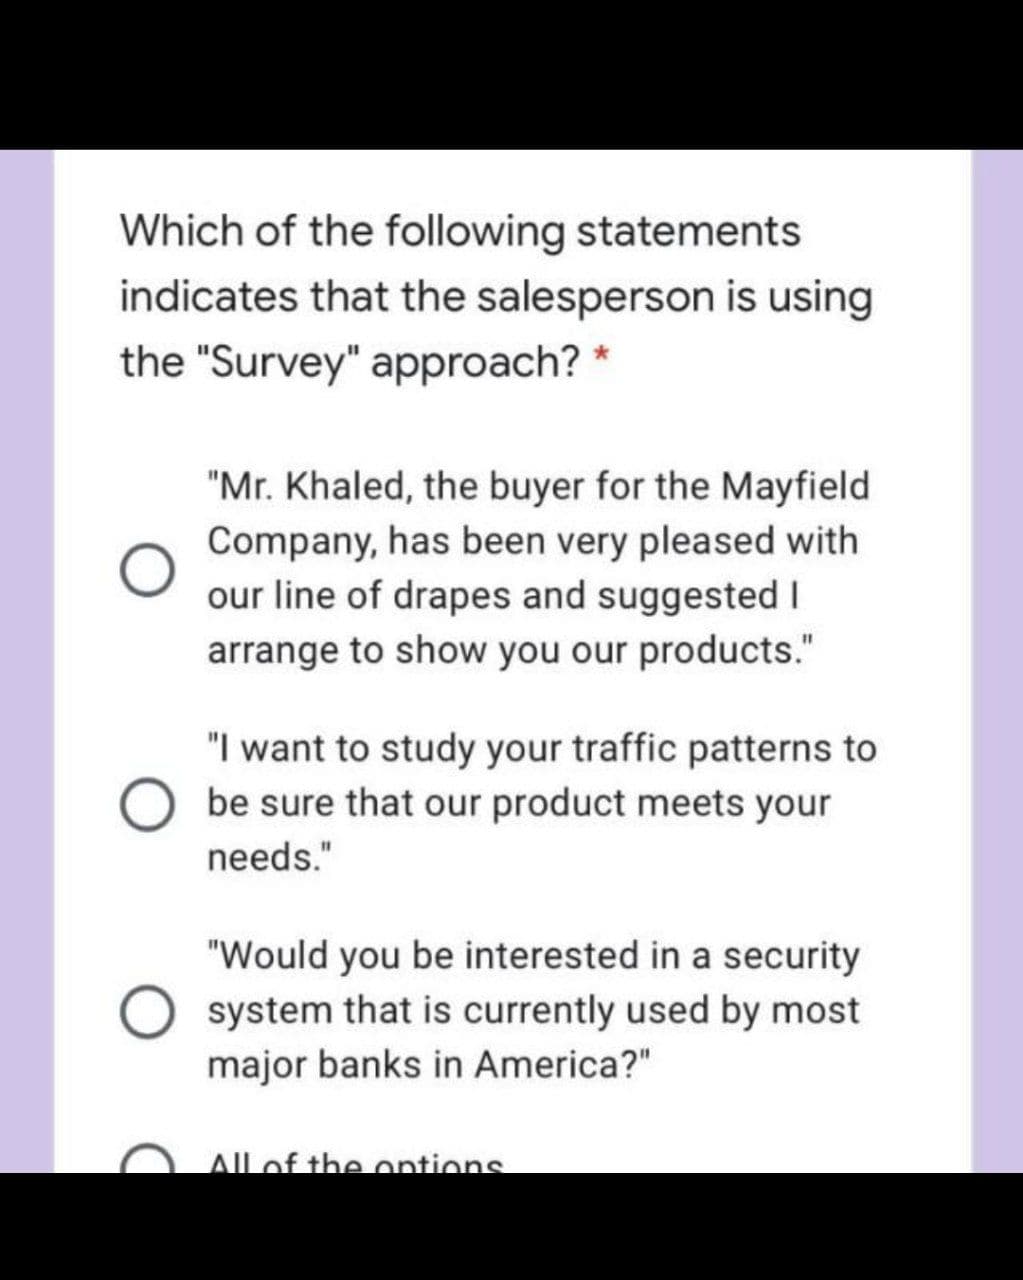 Which of the following statements
indicates that the salesperson is using
the "Survey" approach? *
"Mr. Khaled, the buyer for the Mayfield
Company, has been very pleased with
our line of drapes and suggested I
arrange to show you our products."
"I want to study your traffic patterns to
be sure that our product meets your
needs."
"Would you be interested in a security
system that is currently used by most
major banks in America?"
AIlof the ontions
